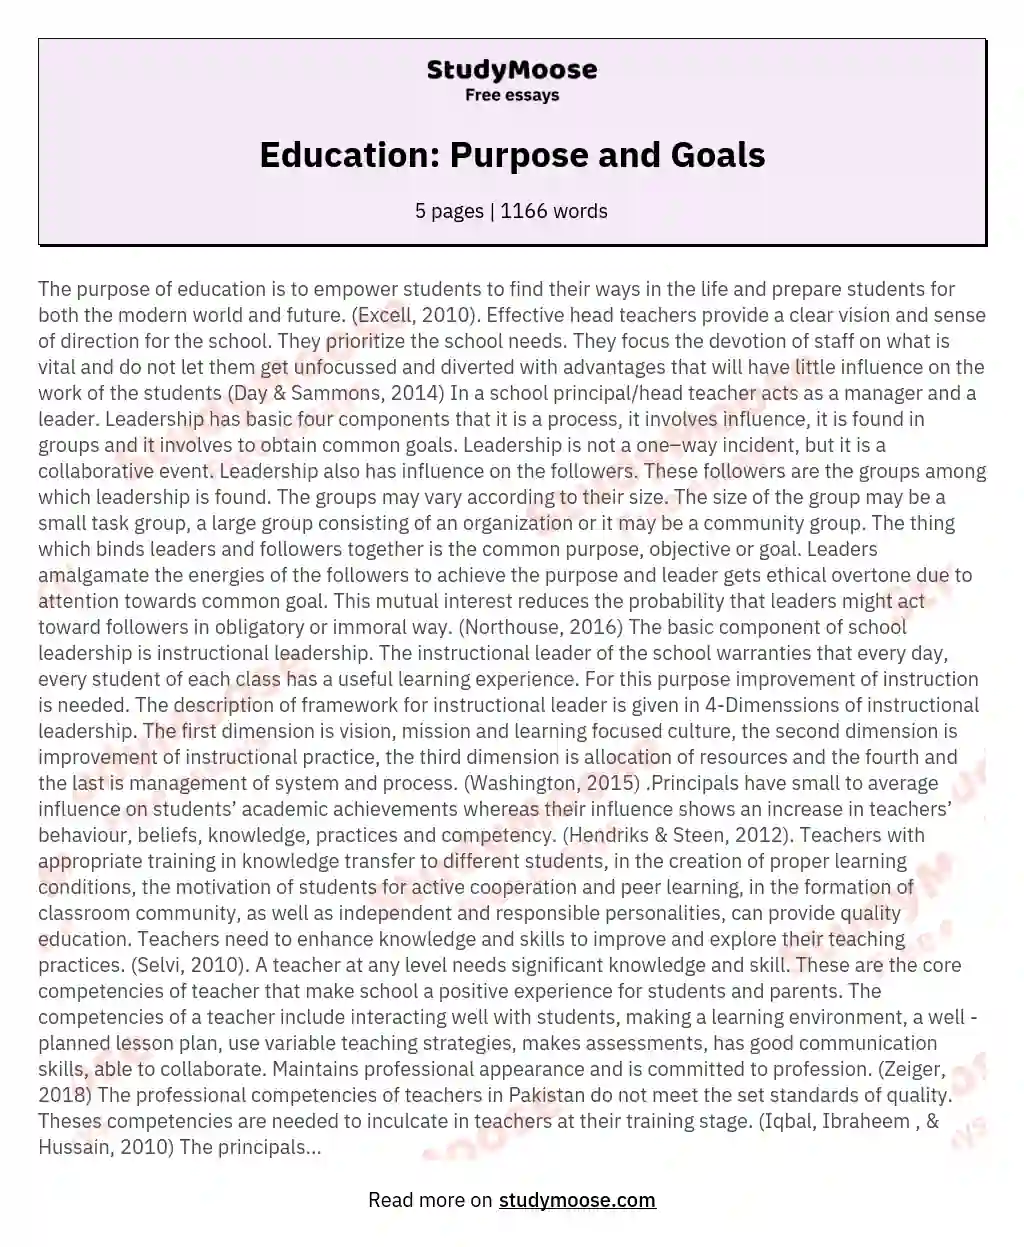 Education: Purpose and Goals